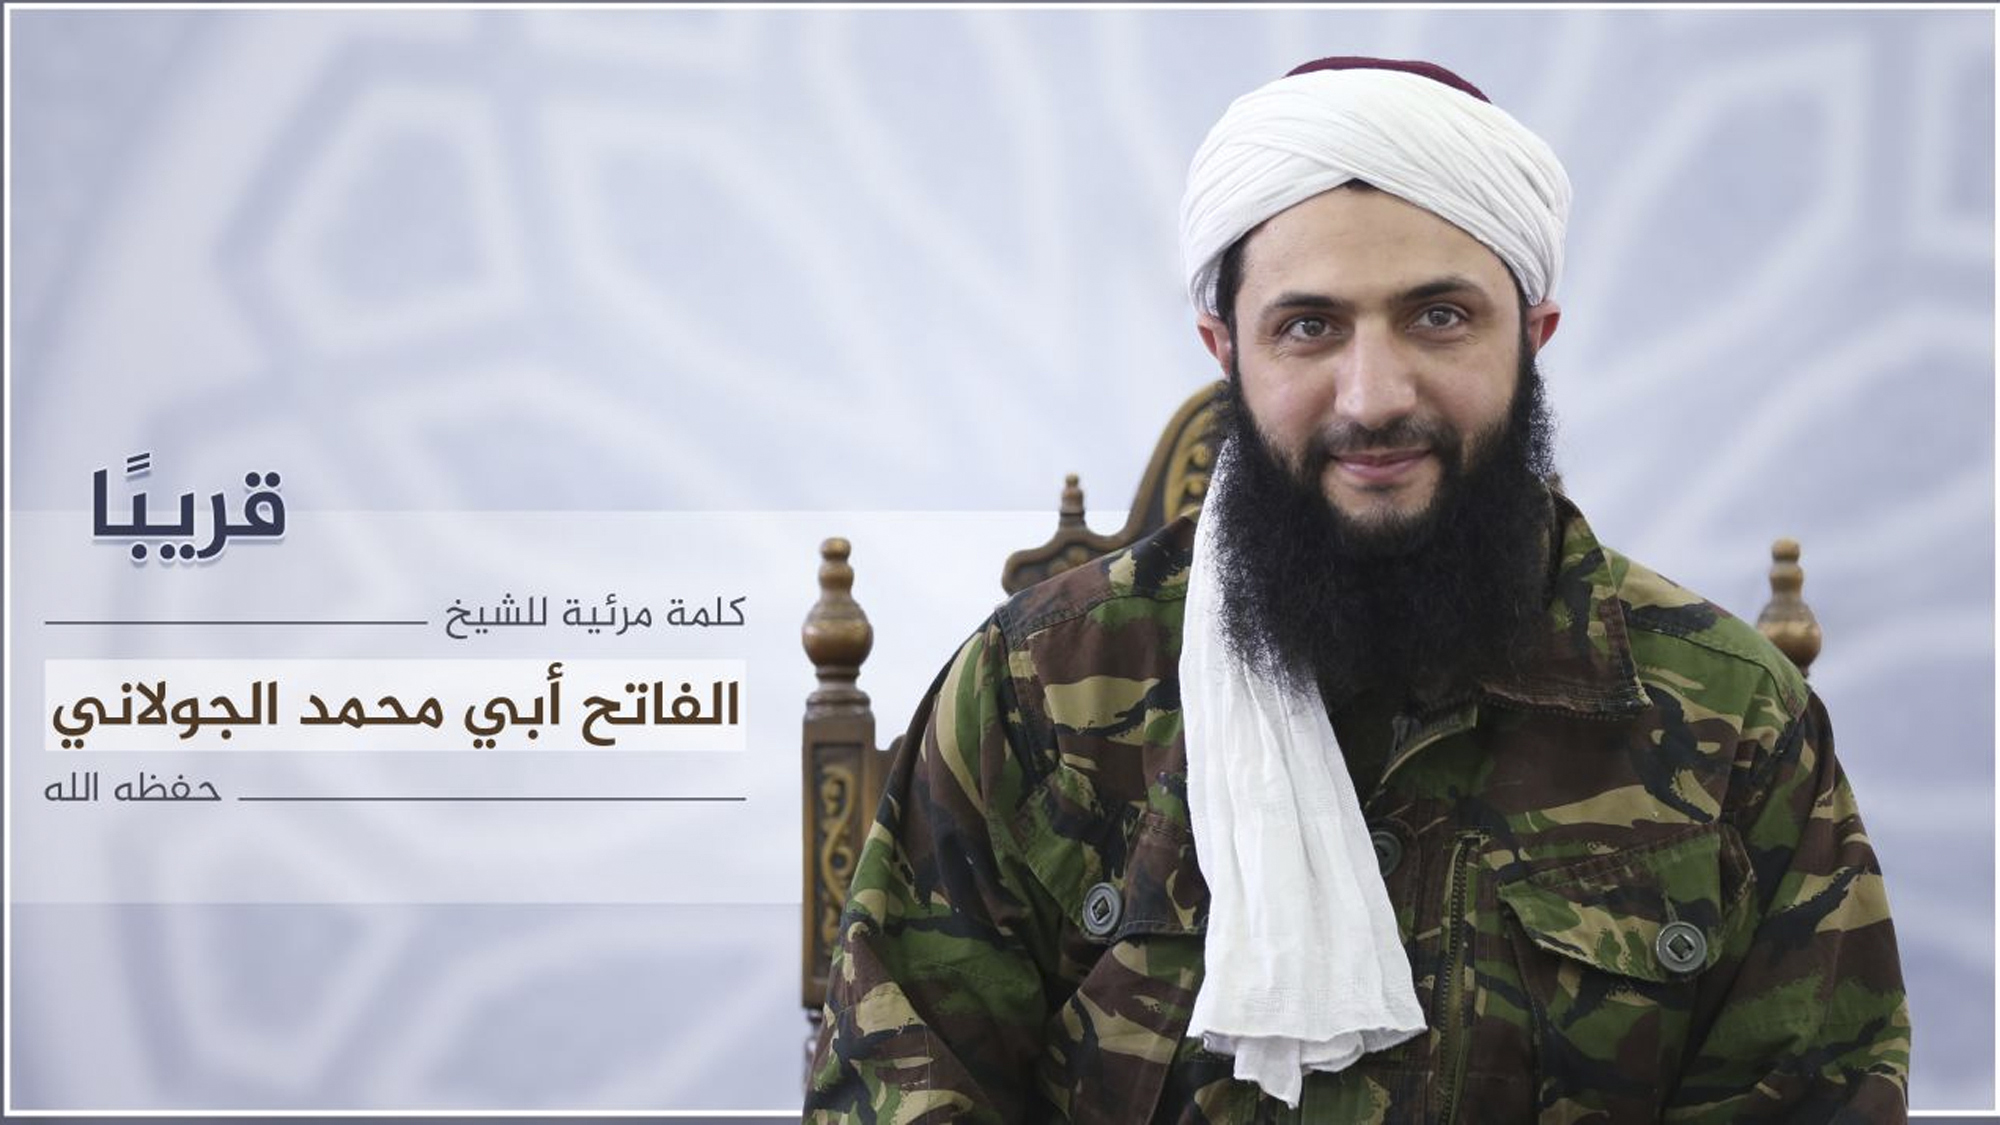 An undated militant photo released online on July 28, 2016, shows Abu Mohammad al-Julani. The Nusra Front leader announced in a video message that the militant group is changing its name and claims it will have no more ties with al-Qaeda. The video was aired on the Syrian opposition station Orient TV and Al-Jazeera. (AP)